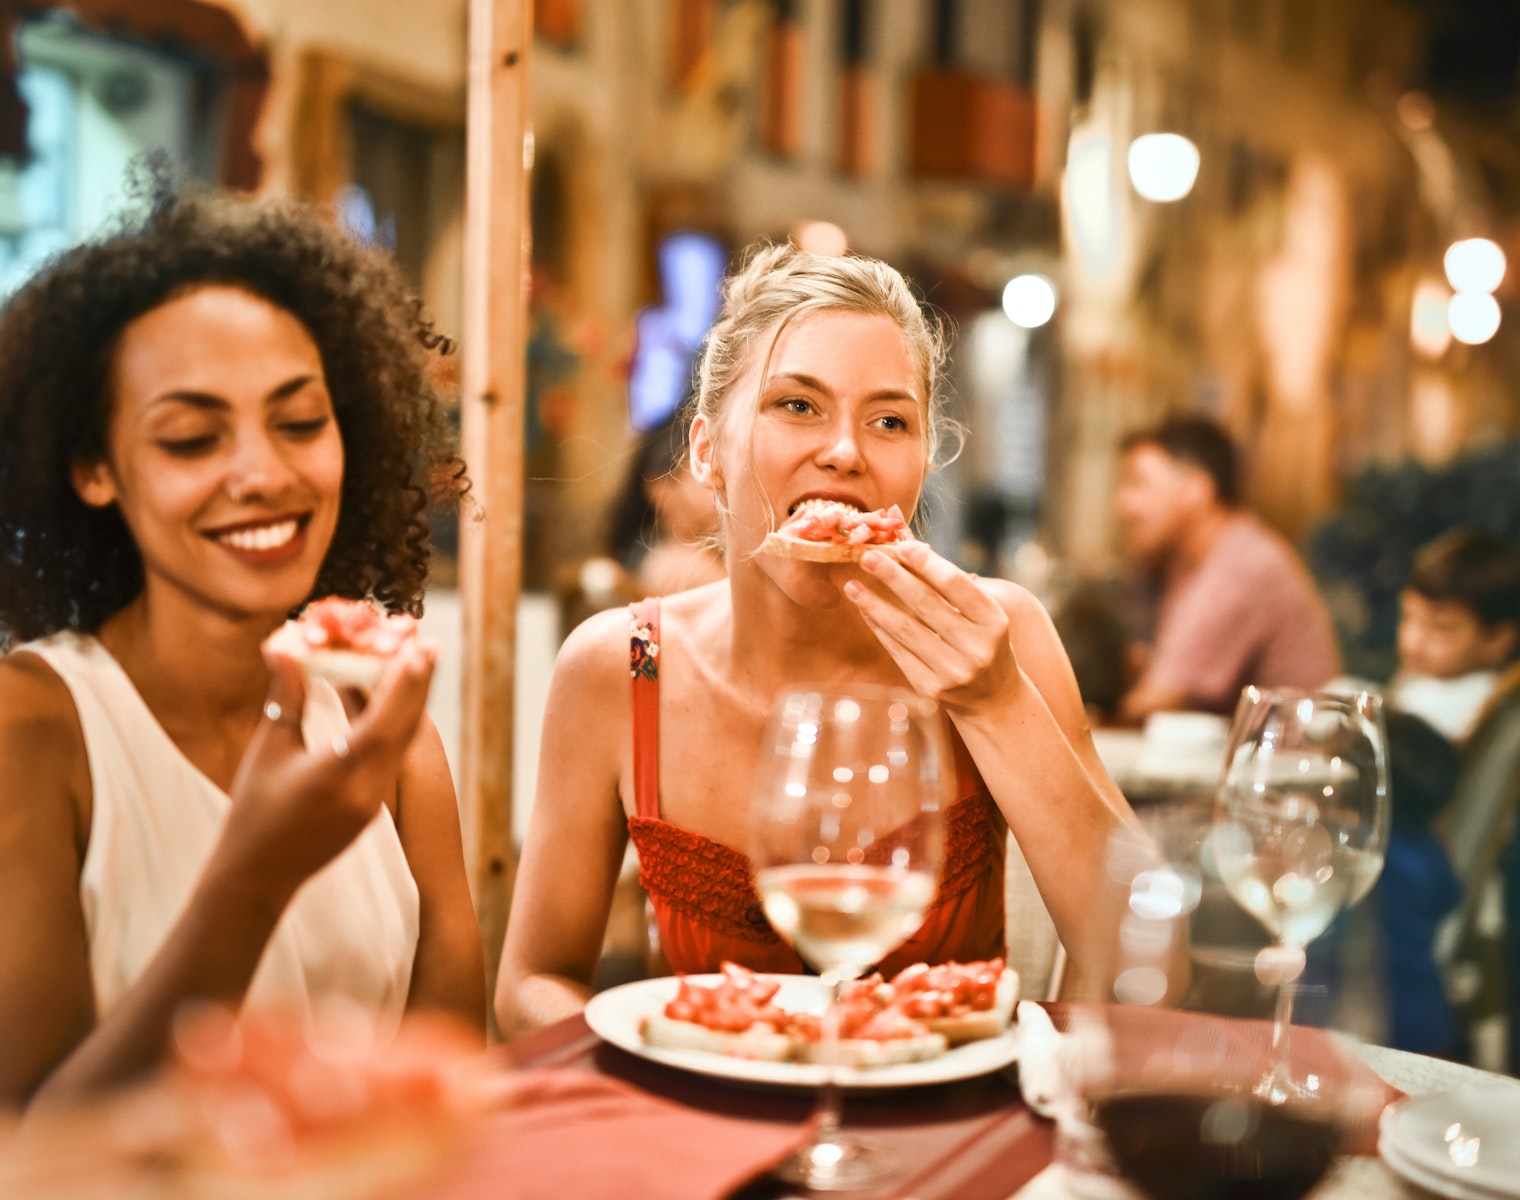 A healthy relationship with food through mindful eating social situations